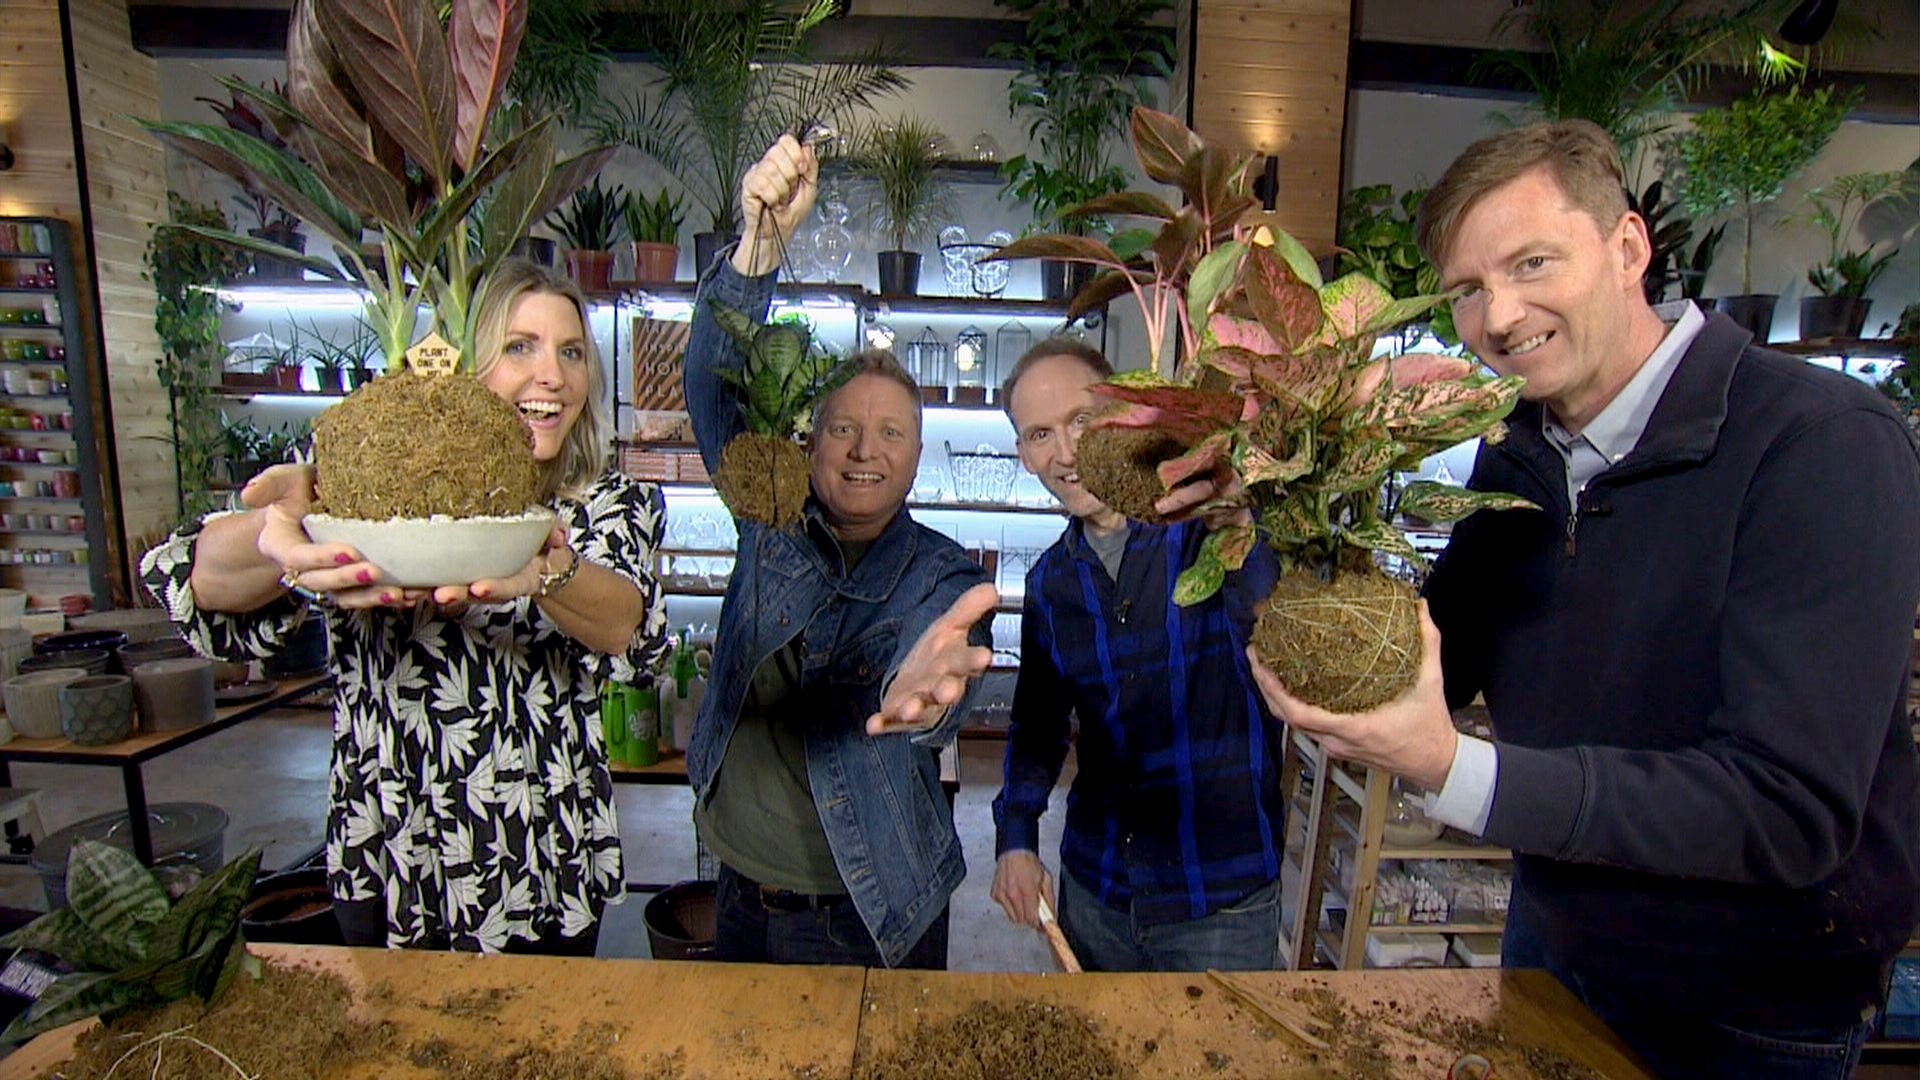 Learning to make Kokedama is just one of the many things plant lovers can find to inspire them at Renton's boutique plant shop Urban Sprouts. Sponsored by ReachNow.